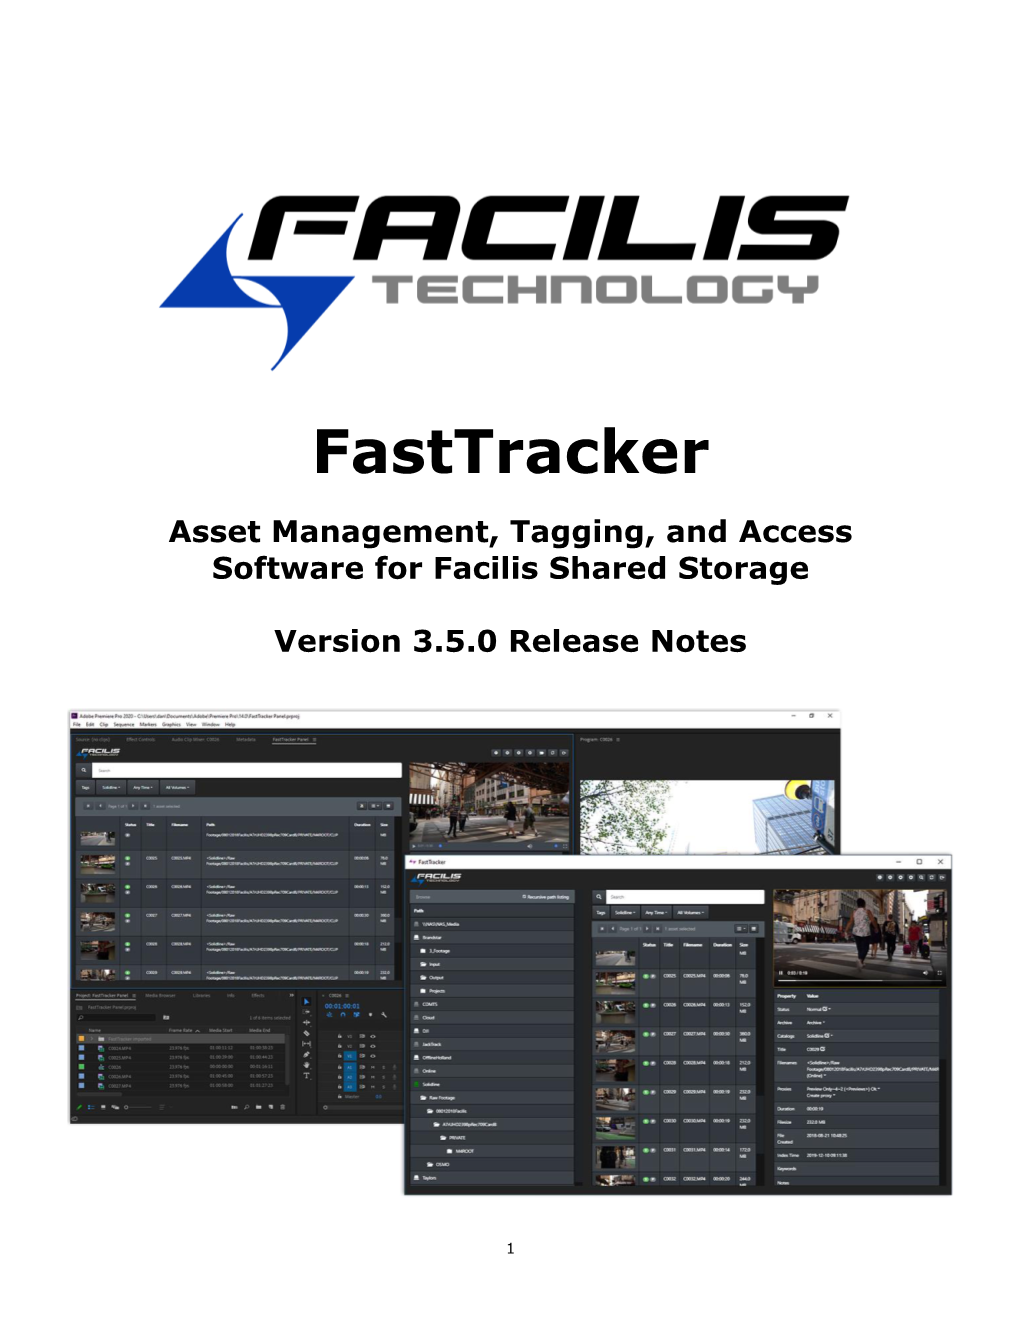 Fasttracker Release Notes